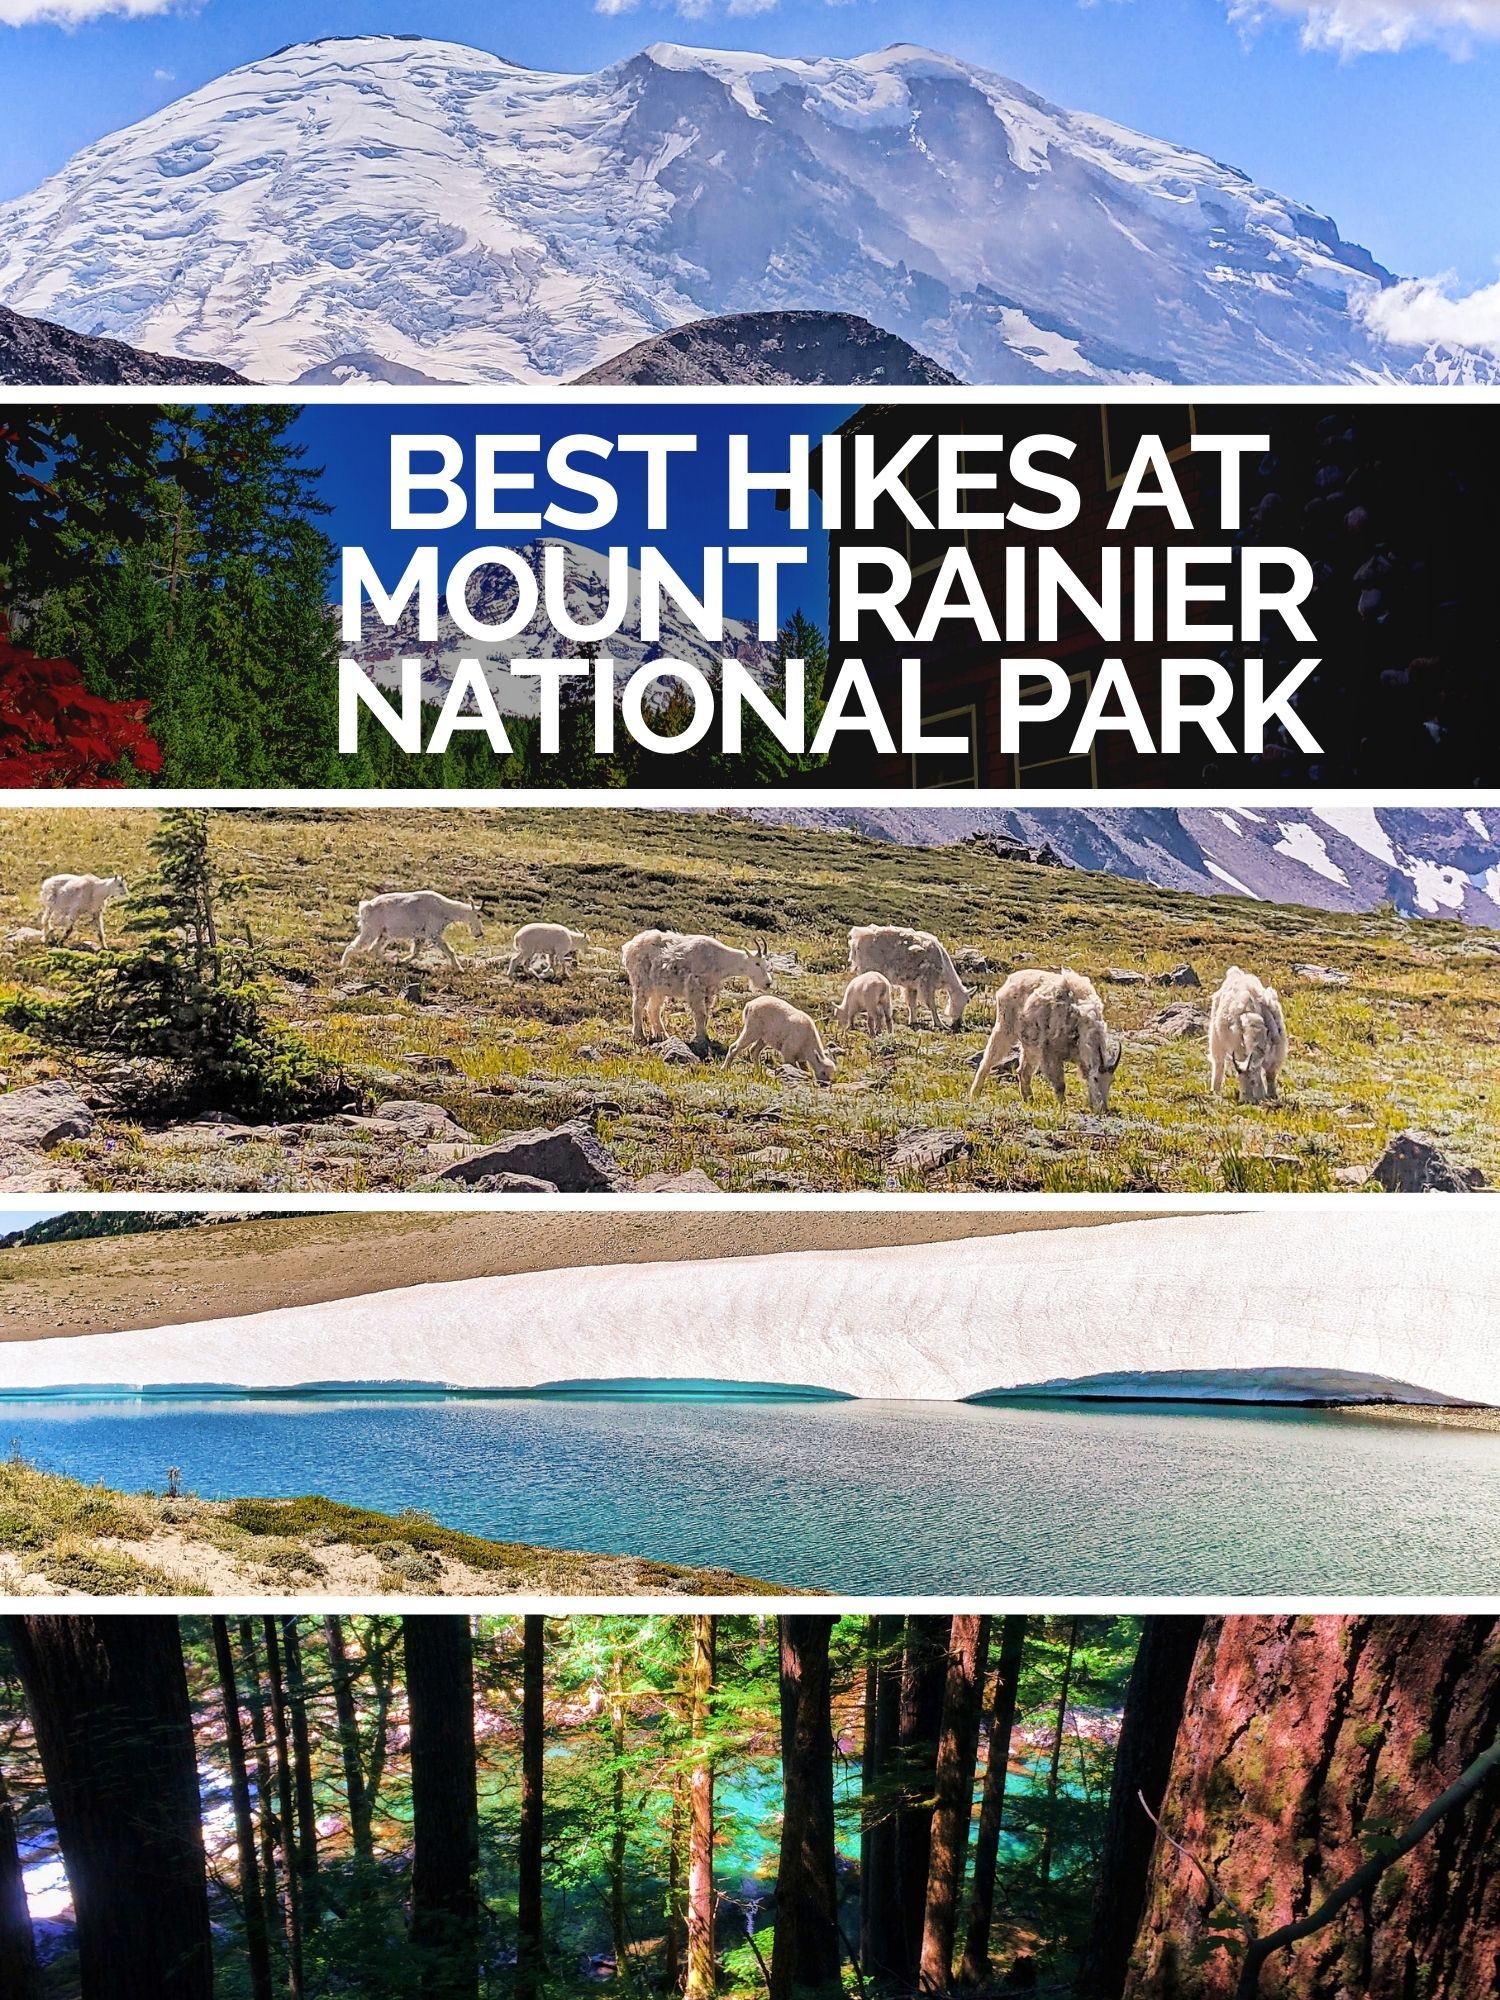 Hiking at Mount Rainier National Park is a great summer activity. These are the best hikes with kids or for a reasonable challenge. From Paradise to Sunrise, Ohanapecosh to Lake Mowich, great hiking.